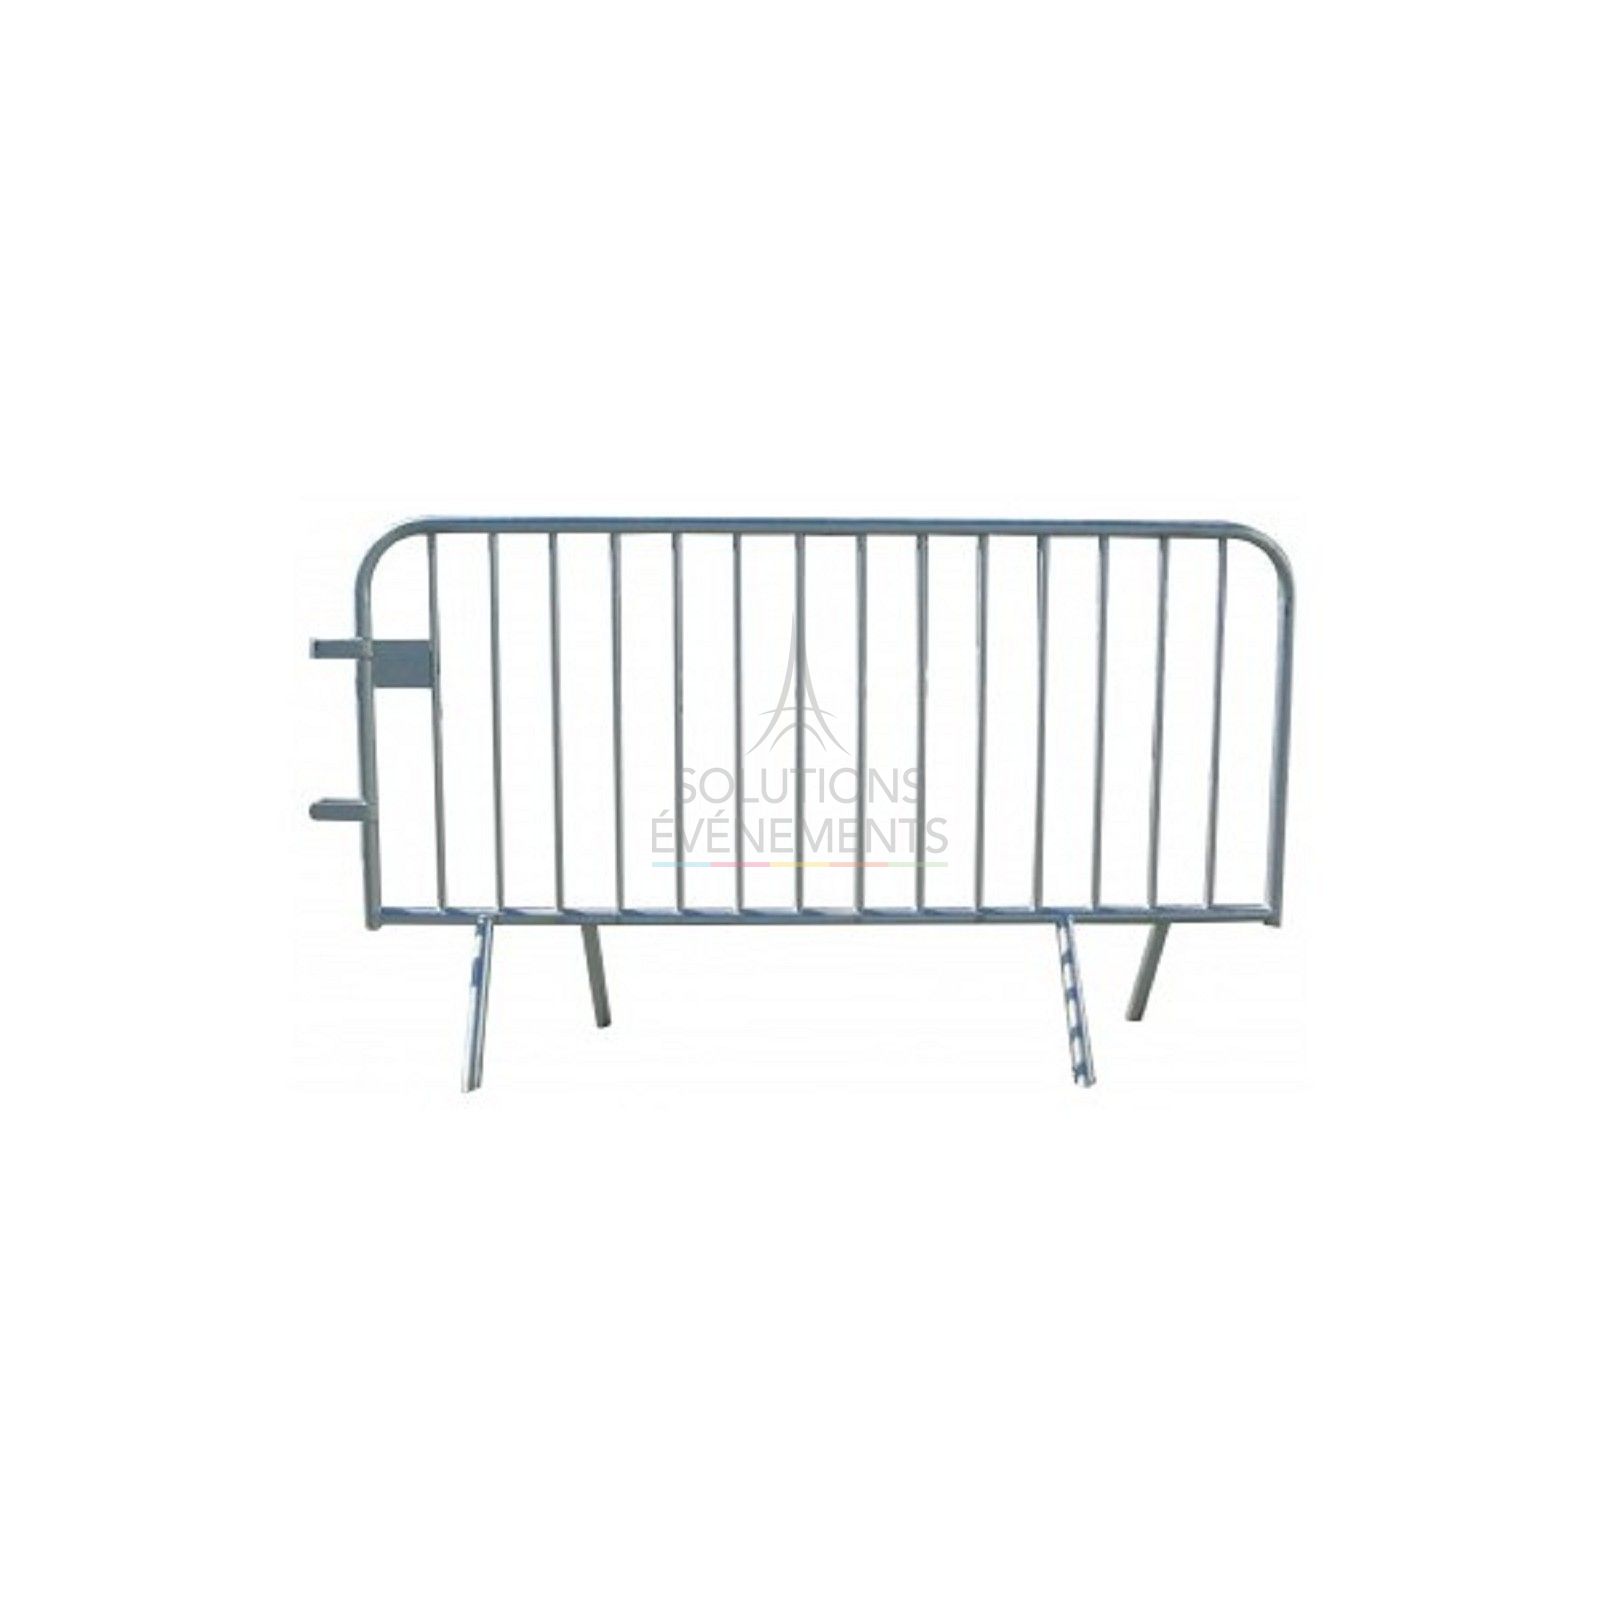 Galvanized metal police barrier for crowd guide